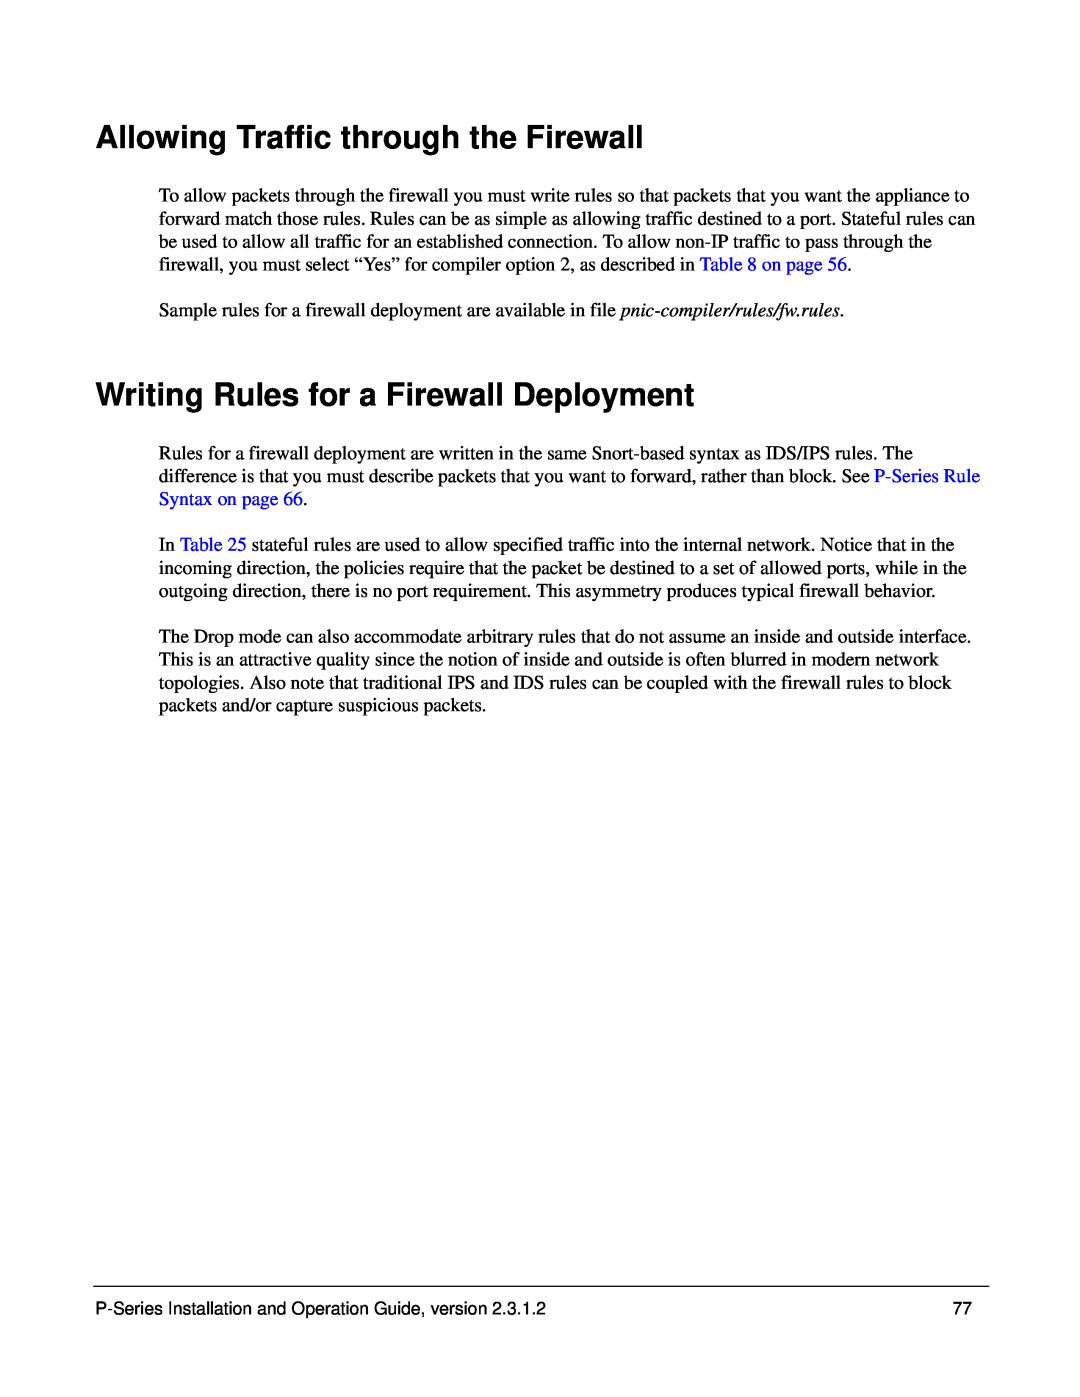 Force10 Networks 100-00055-01 manual Allowing Traffic through the Firewall, Writing Rules for a Firewall Deployment 